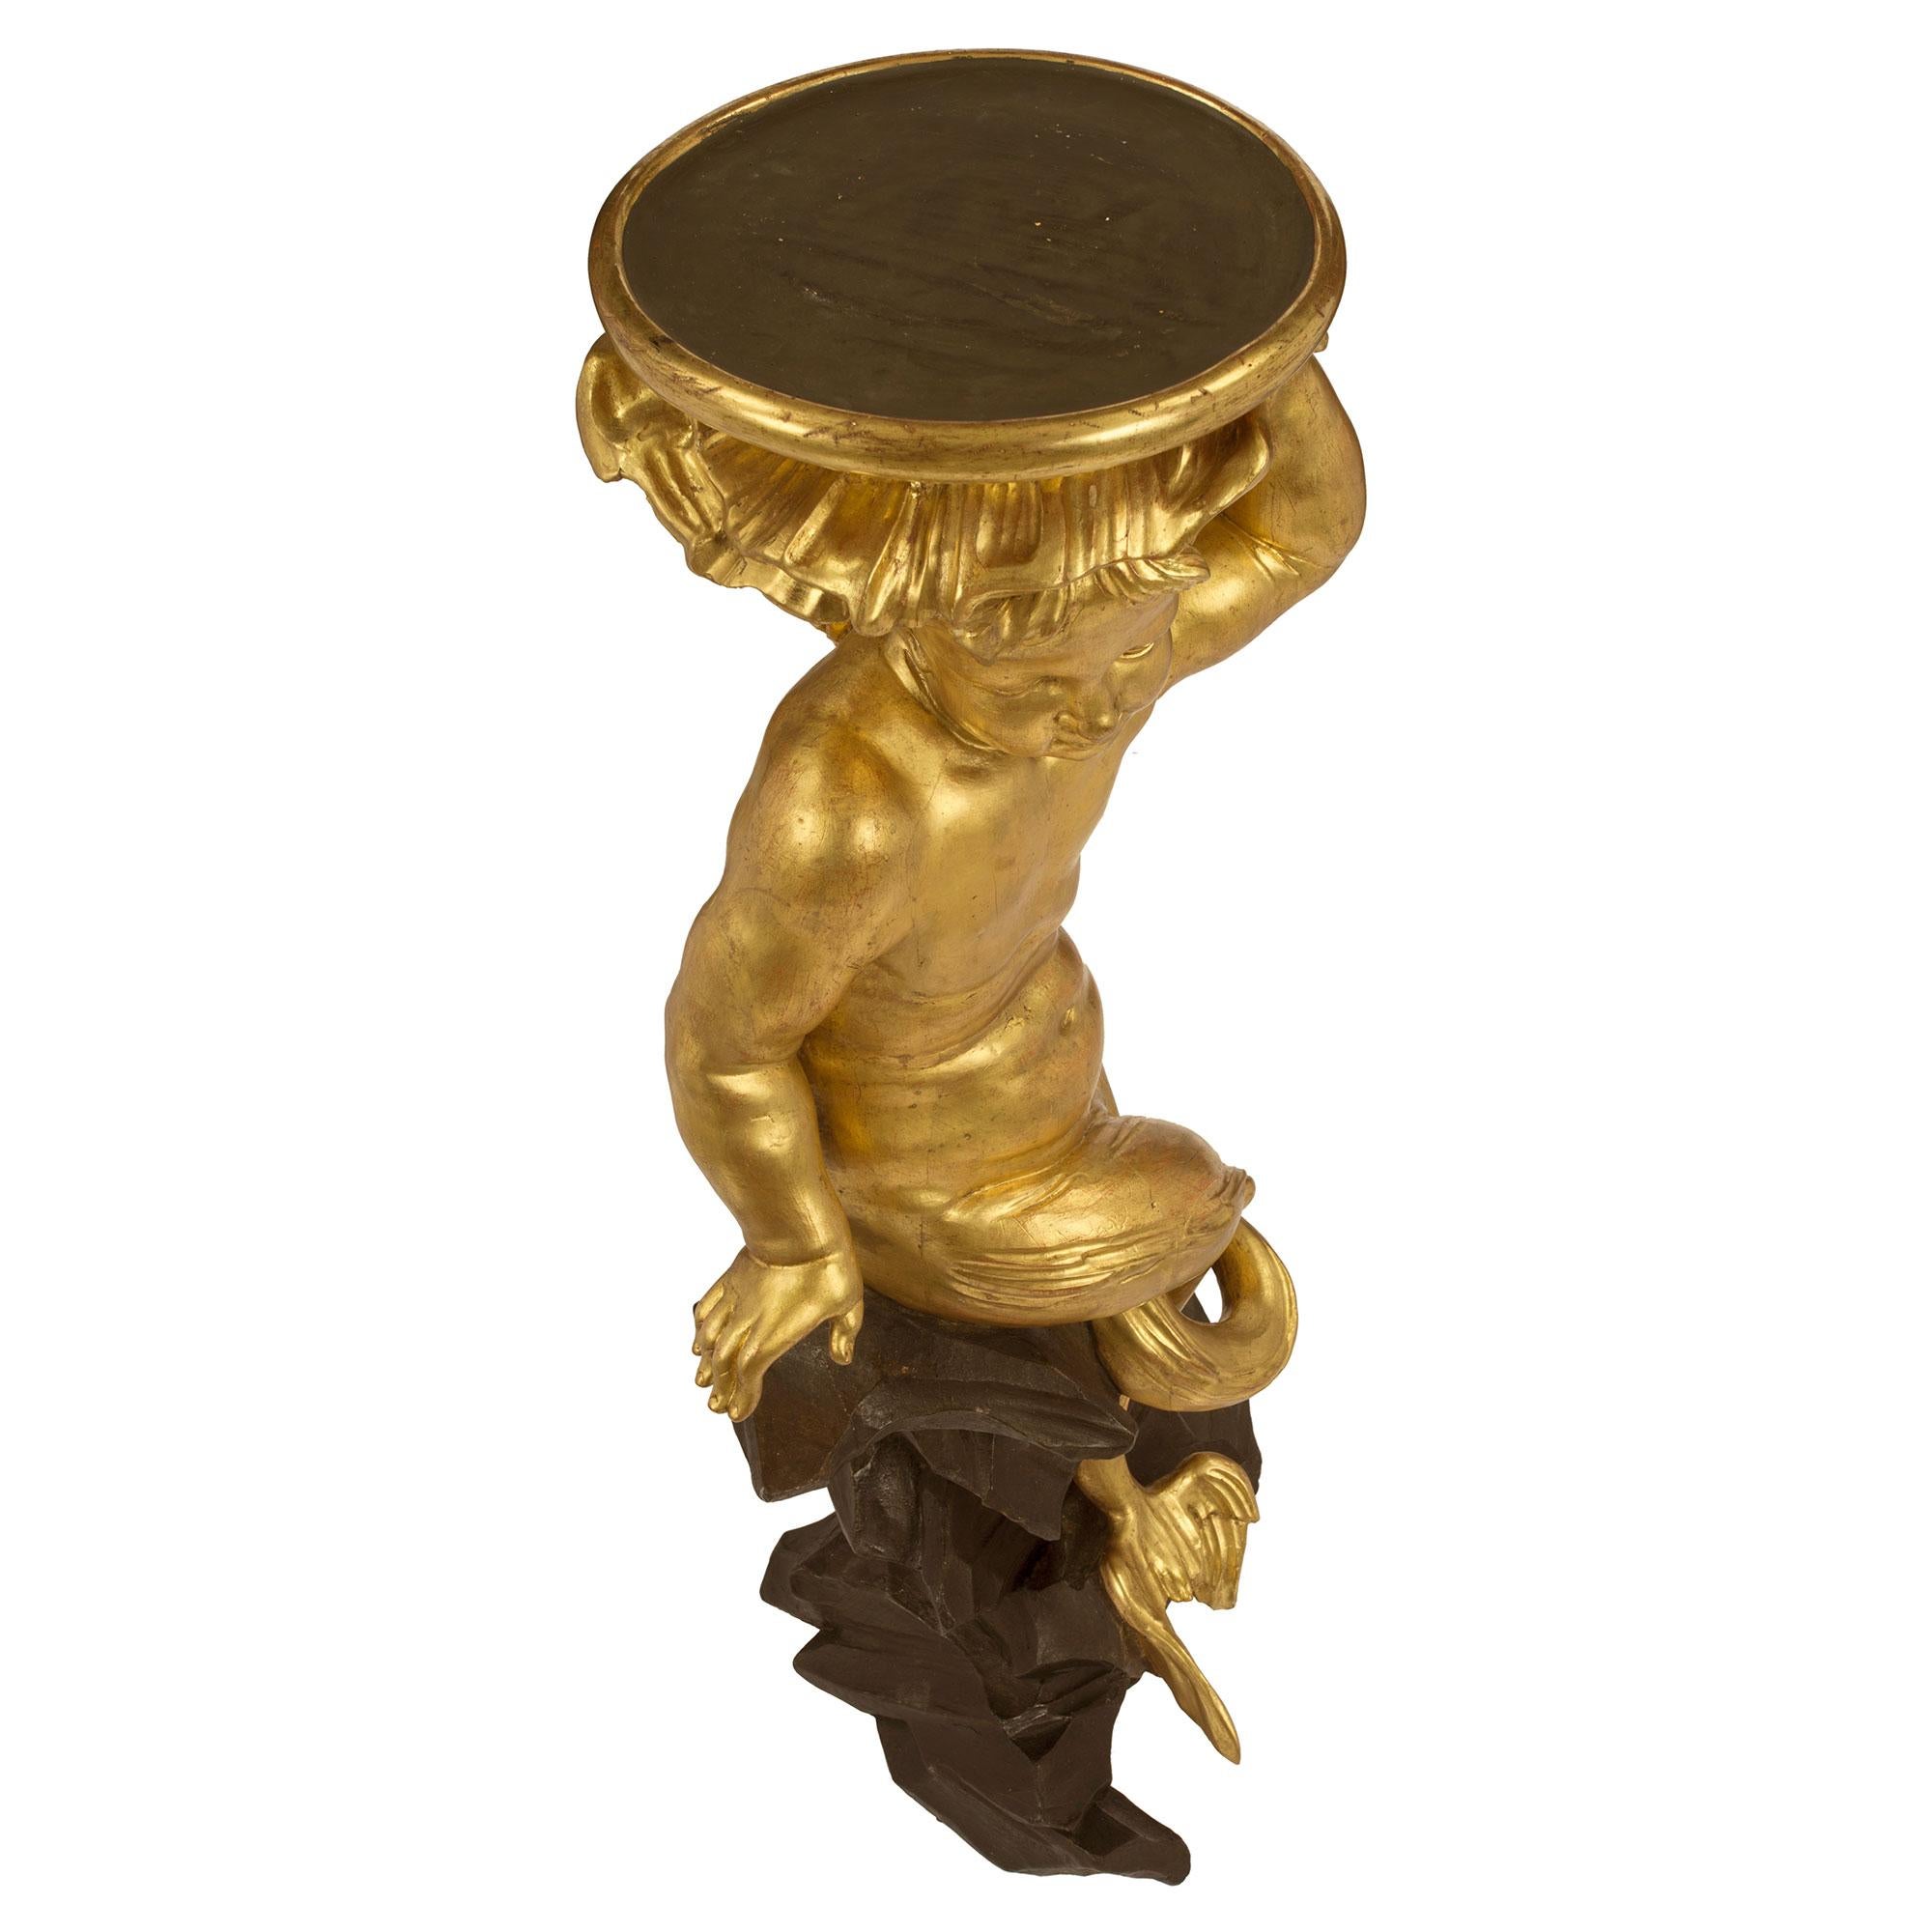 A sensation and most elegant pair of Italian early 18th century Roman giltwood and black polychrome pedestals. The pair are raised by a rock like grotto base in a dark polychrome below a seated merchild. Each charming life size gilded merchild has a